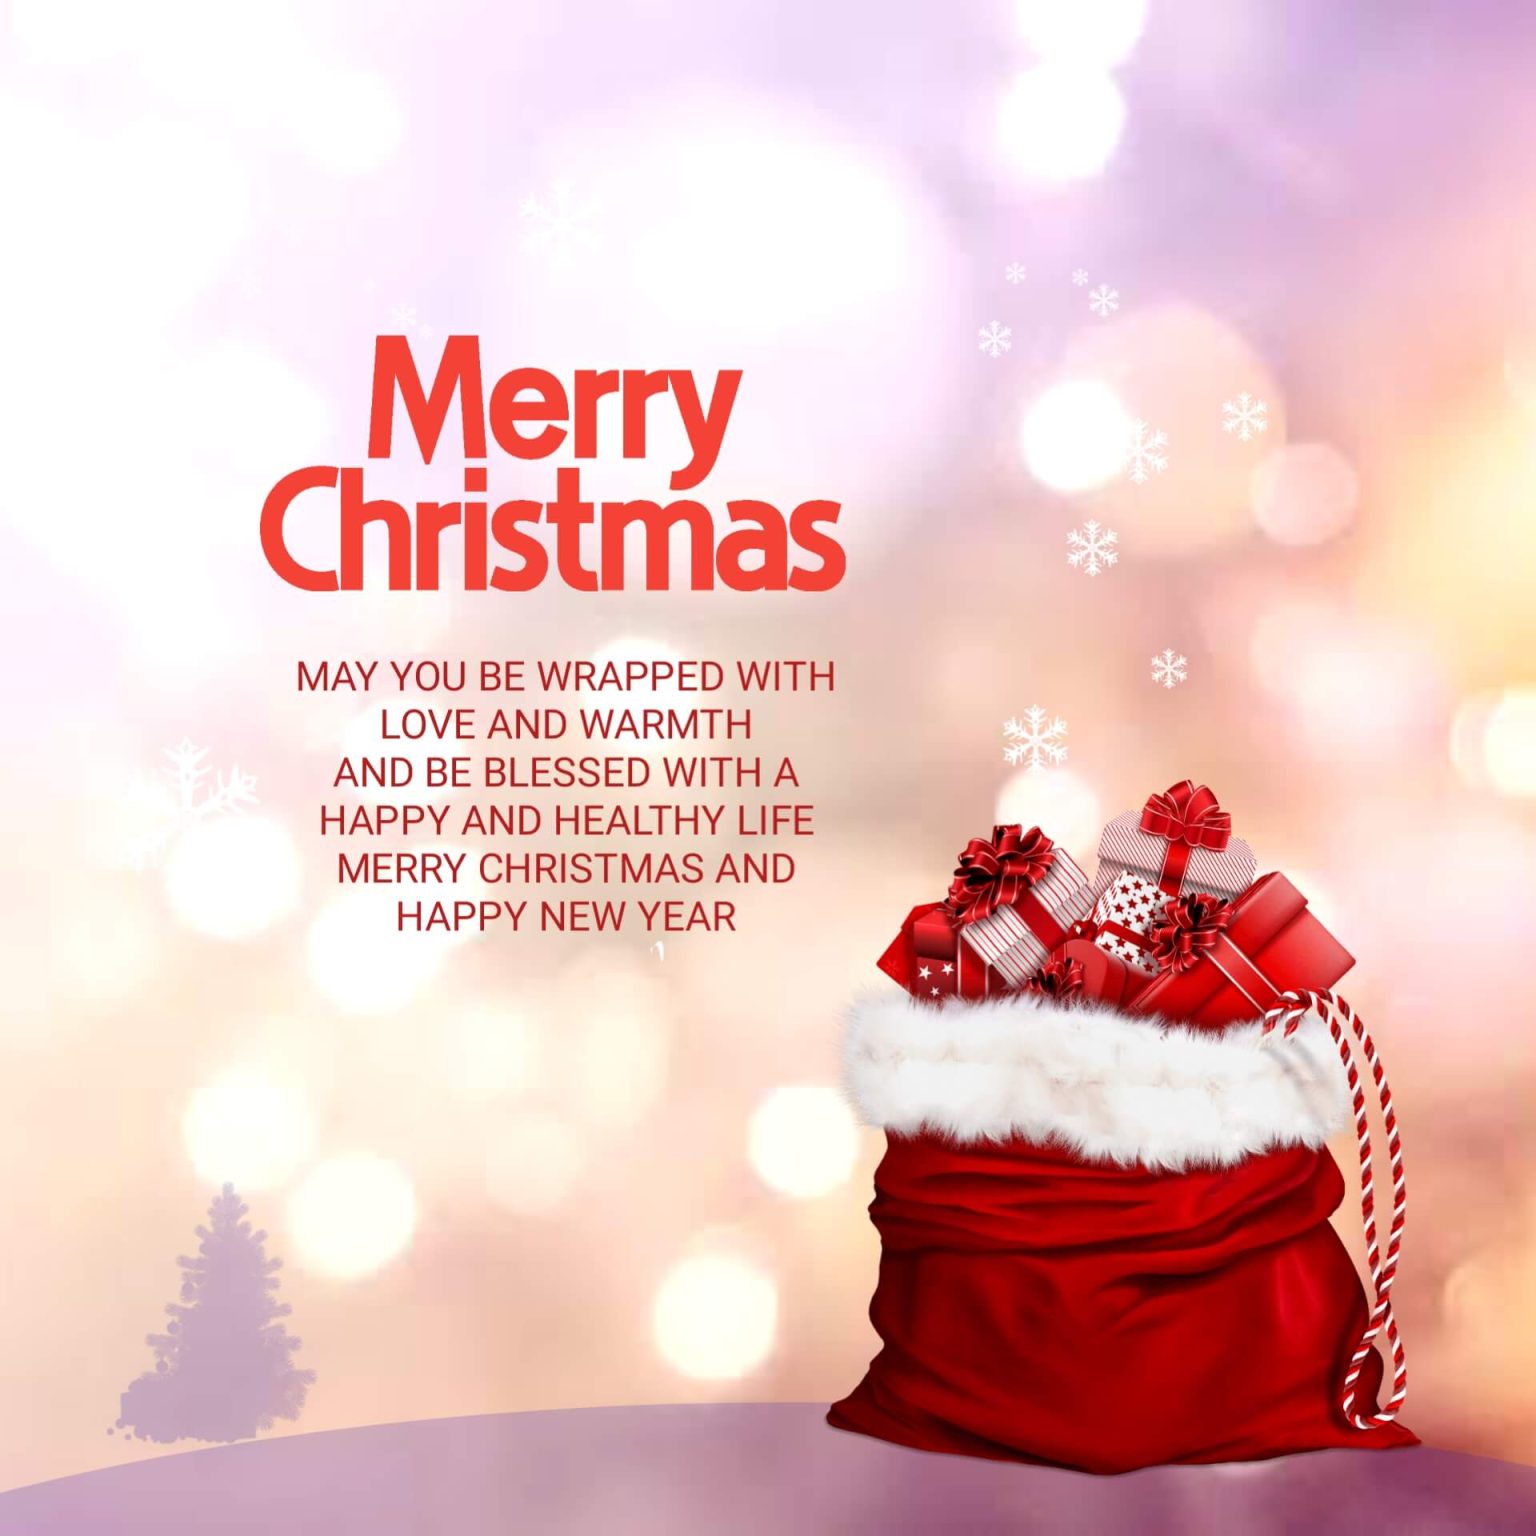 merry Christmas wishes images 2021